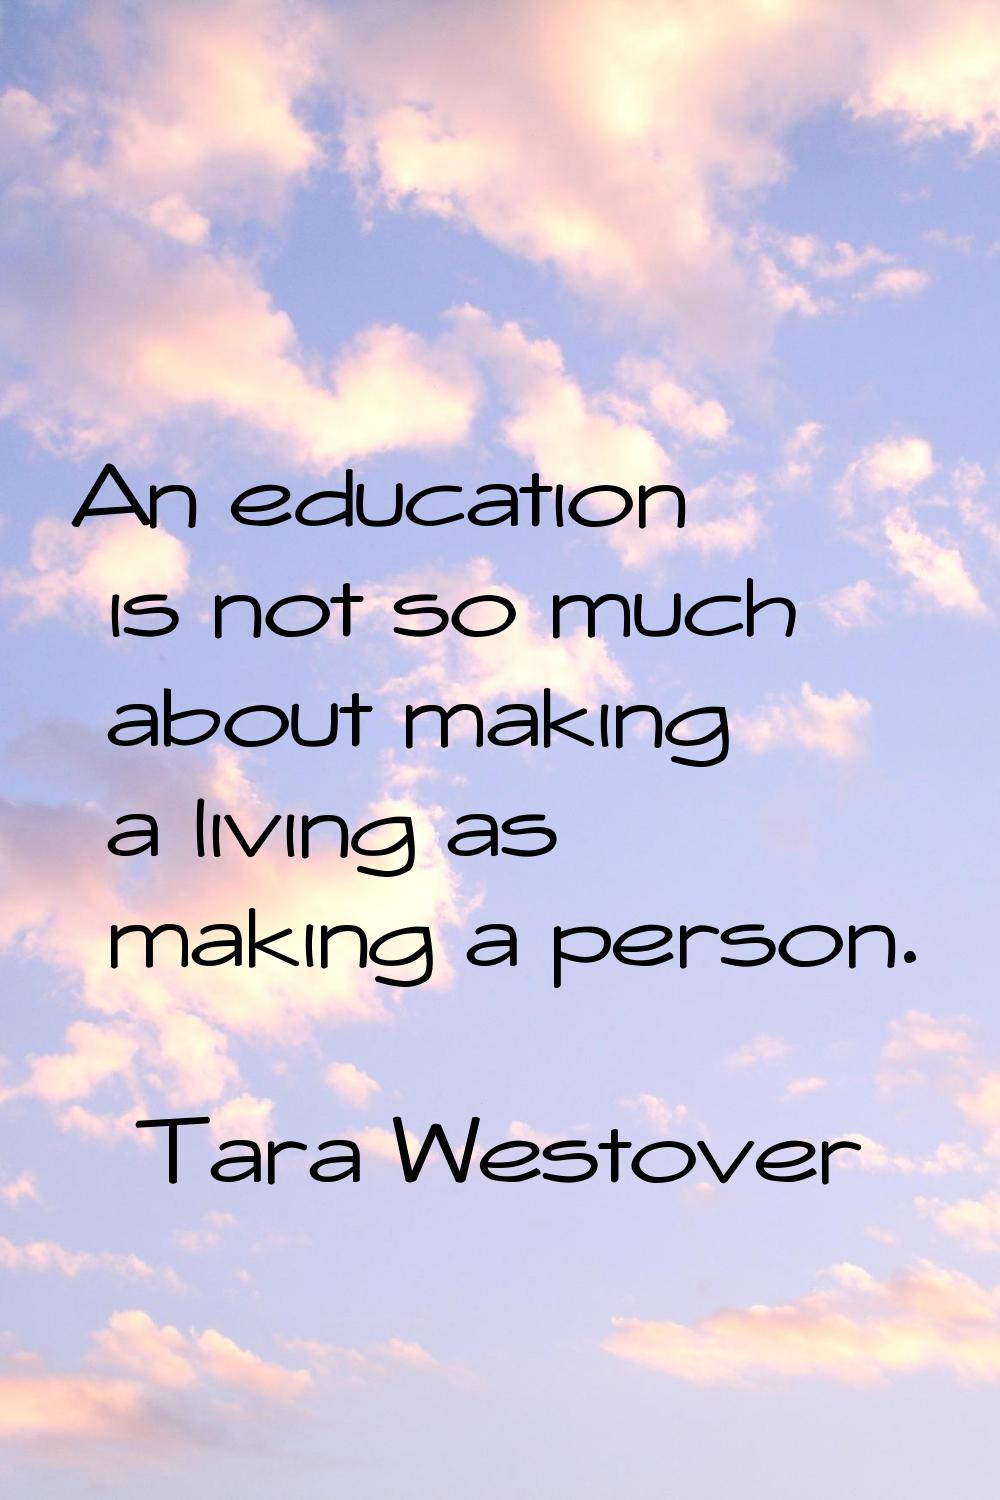 An education is not so much about making a living as making a person.